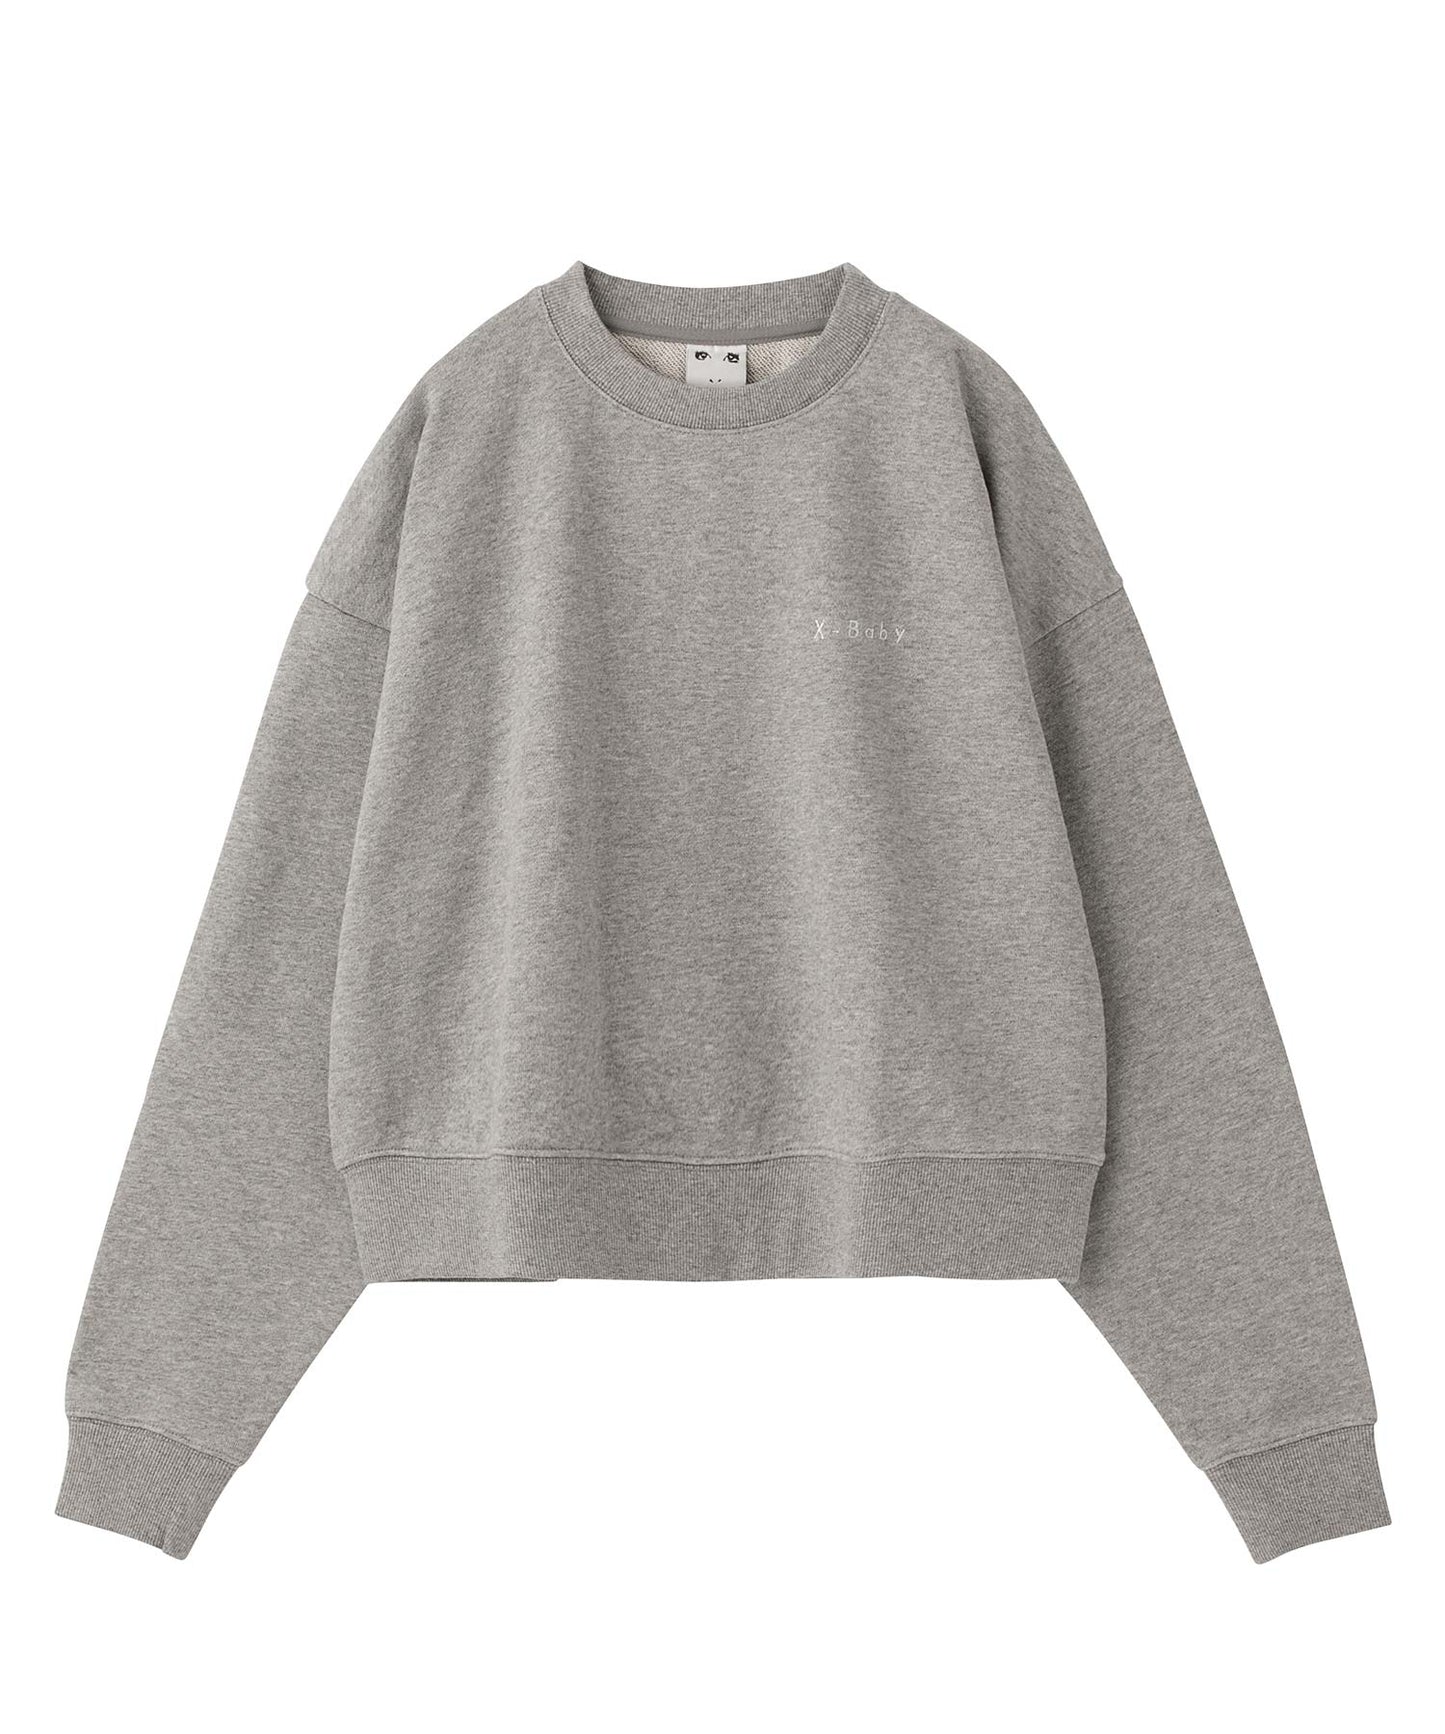 X-baby CROPPED CREW SWEAT TOP